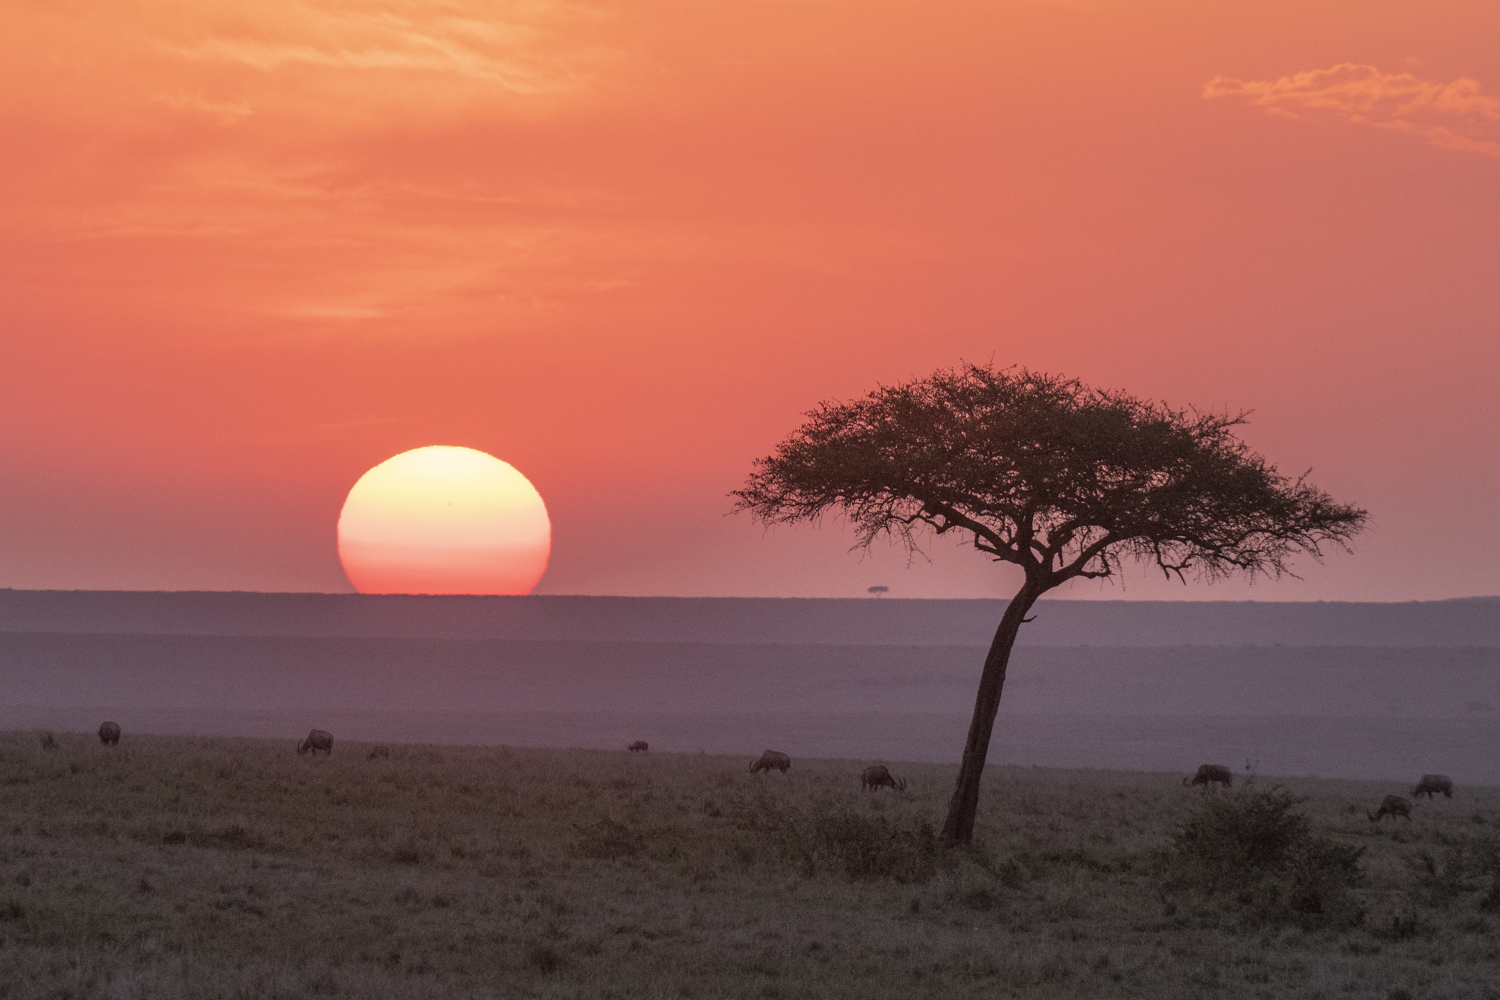 The Masai Mara like you have never seen it before